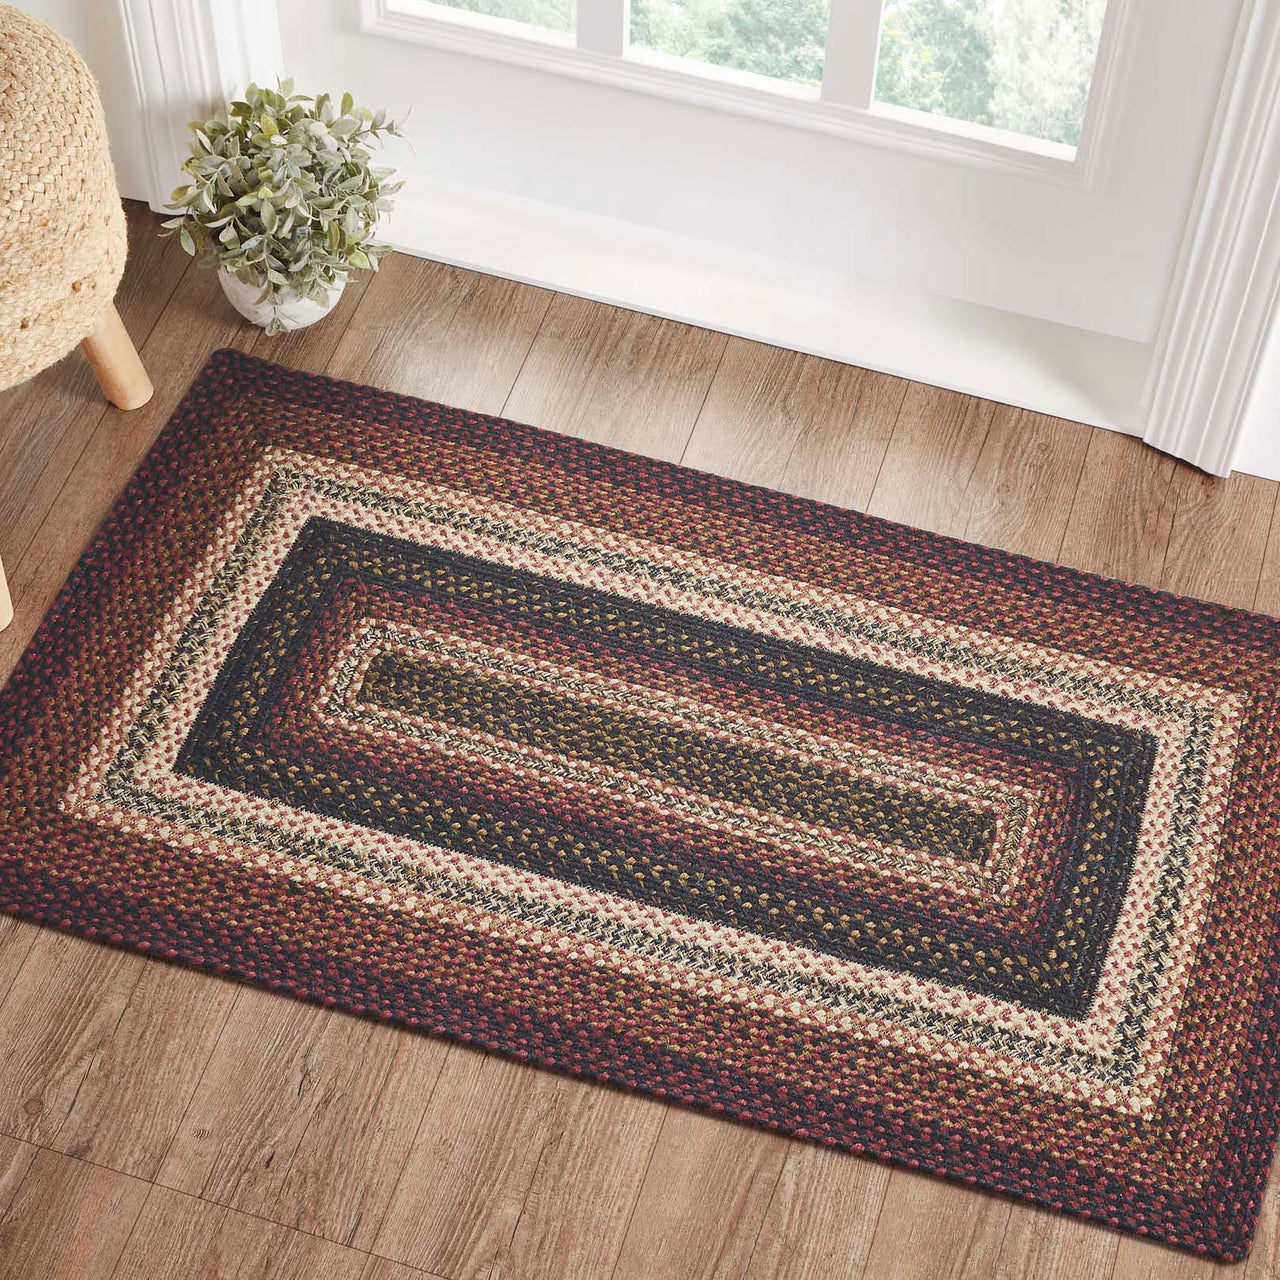 Beckham Jute Braided Rug Rect with Rug Pad 27"x48" VHC Brands